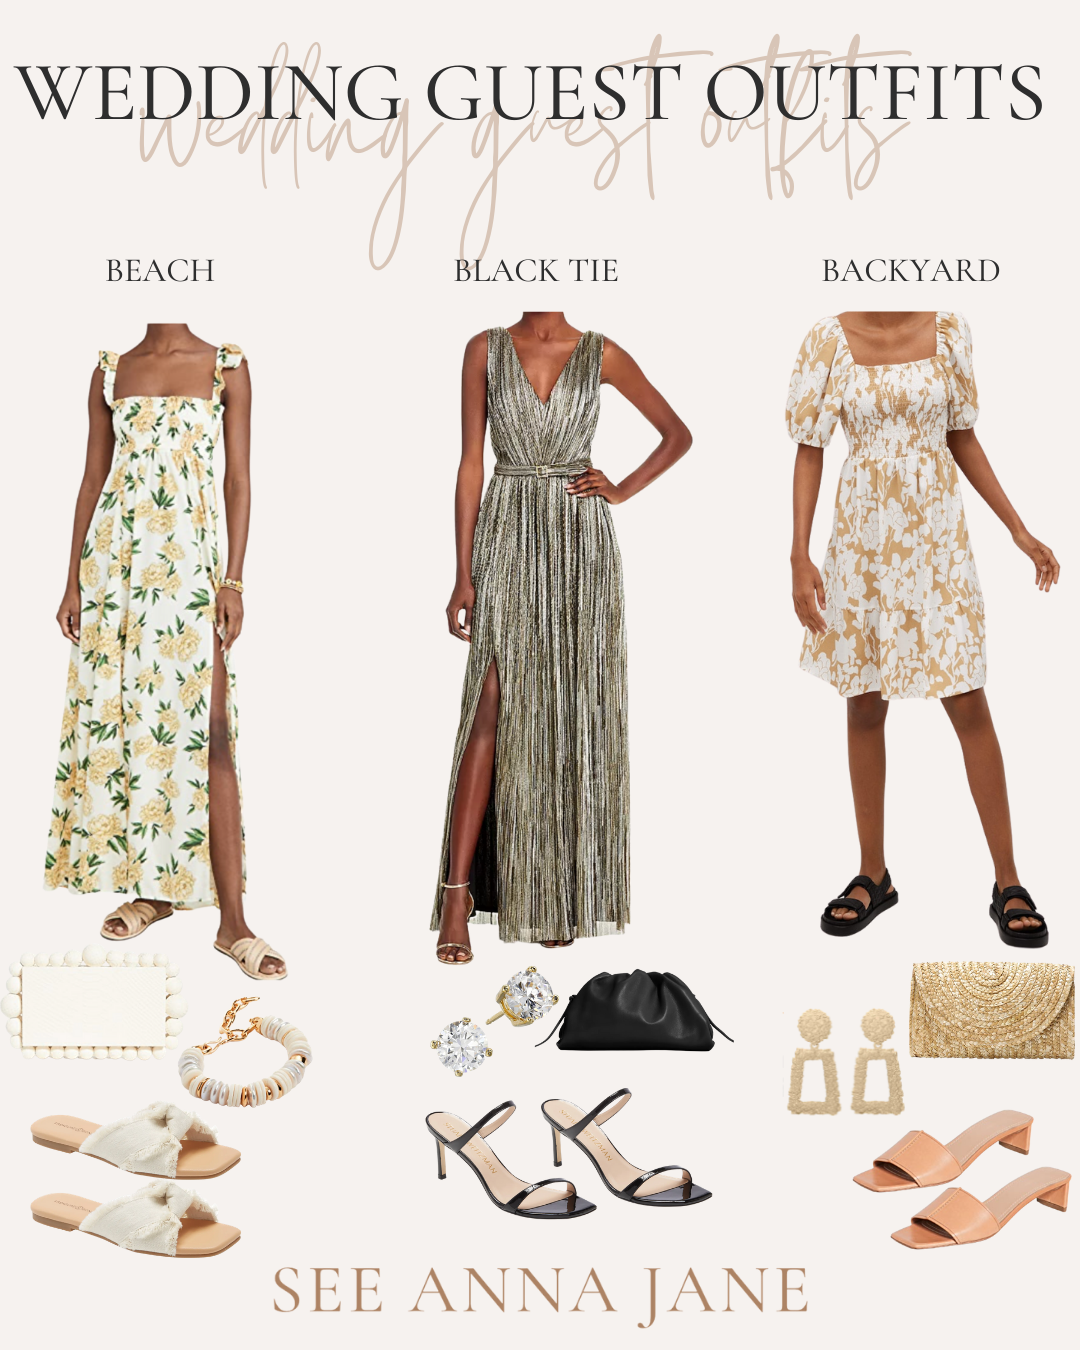 wedding guest looks outfit ideas - See (Anna) Jane.